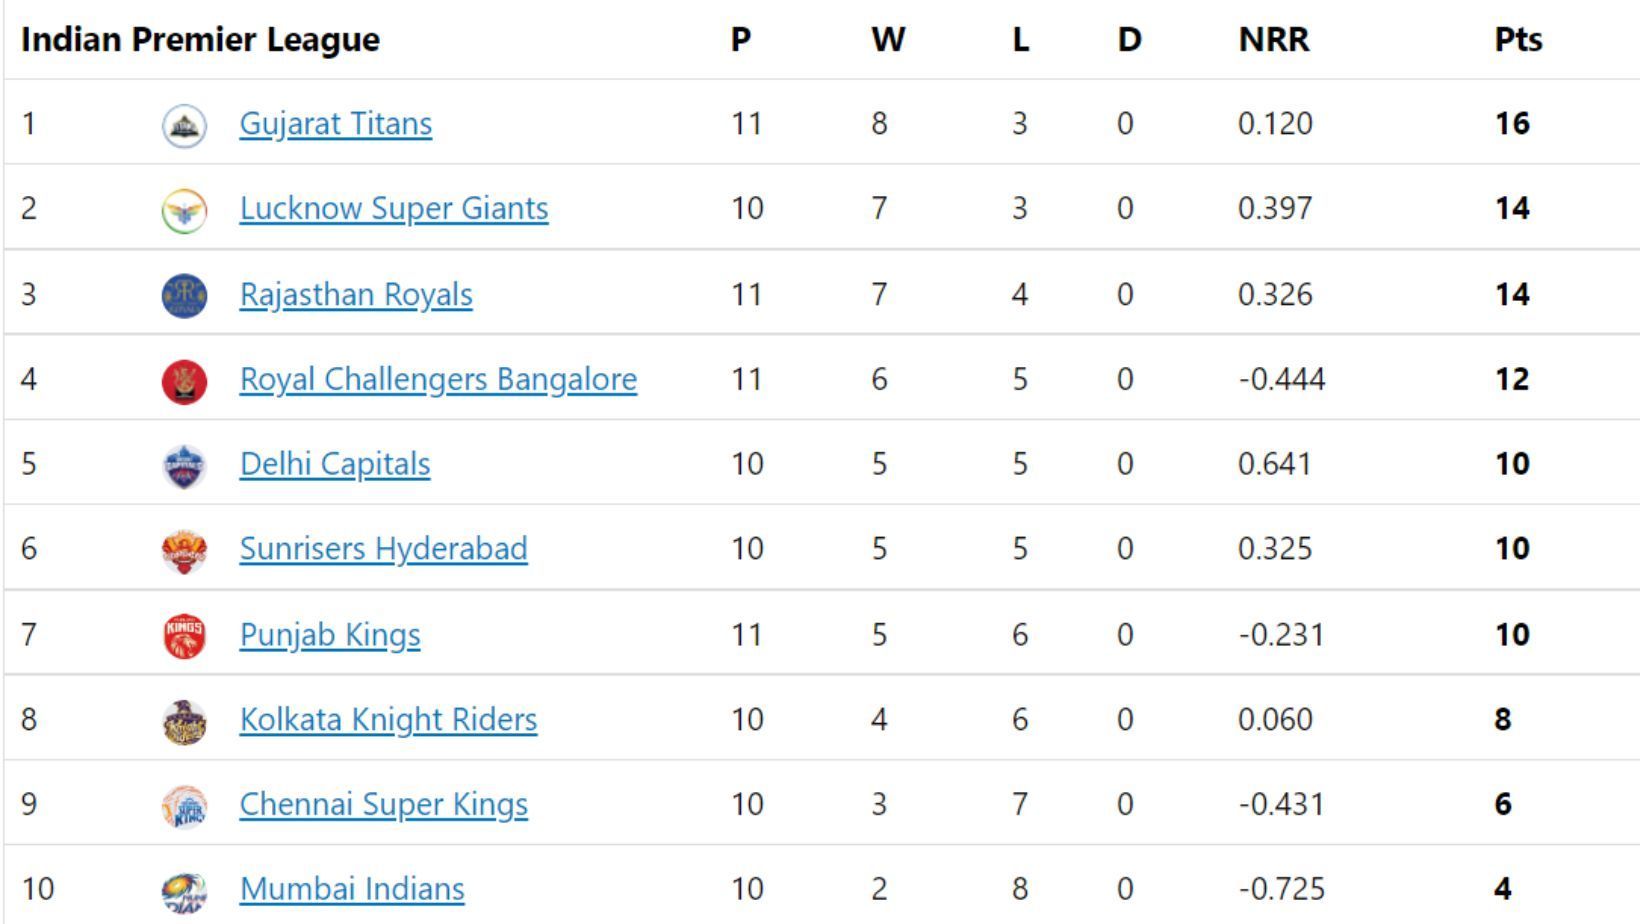 Rajasthan Royals get some breathing space in IPL 2022 points table.